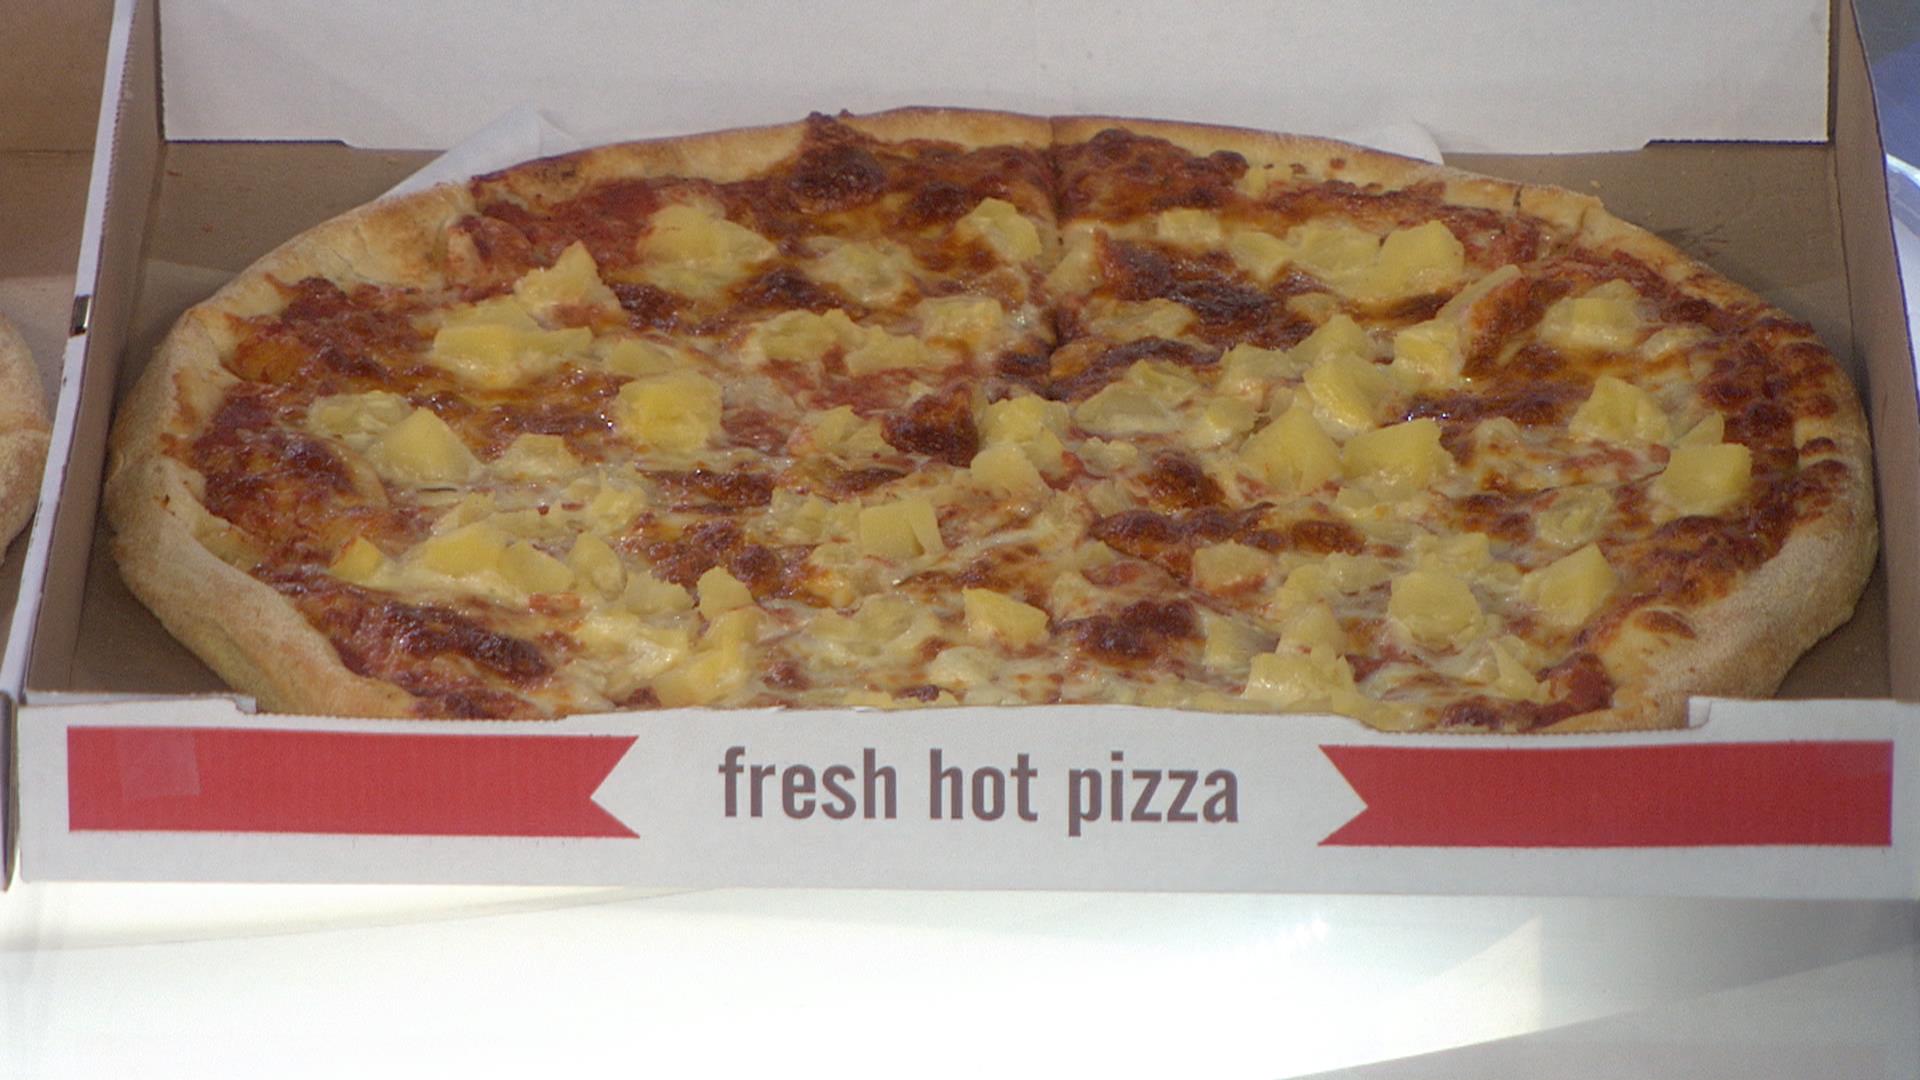 Iceland's president would ban pineapple on pizza if he could